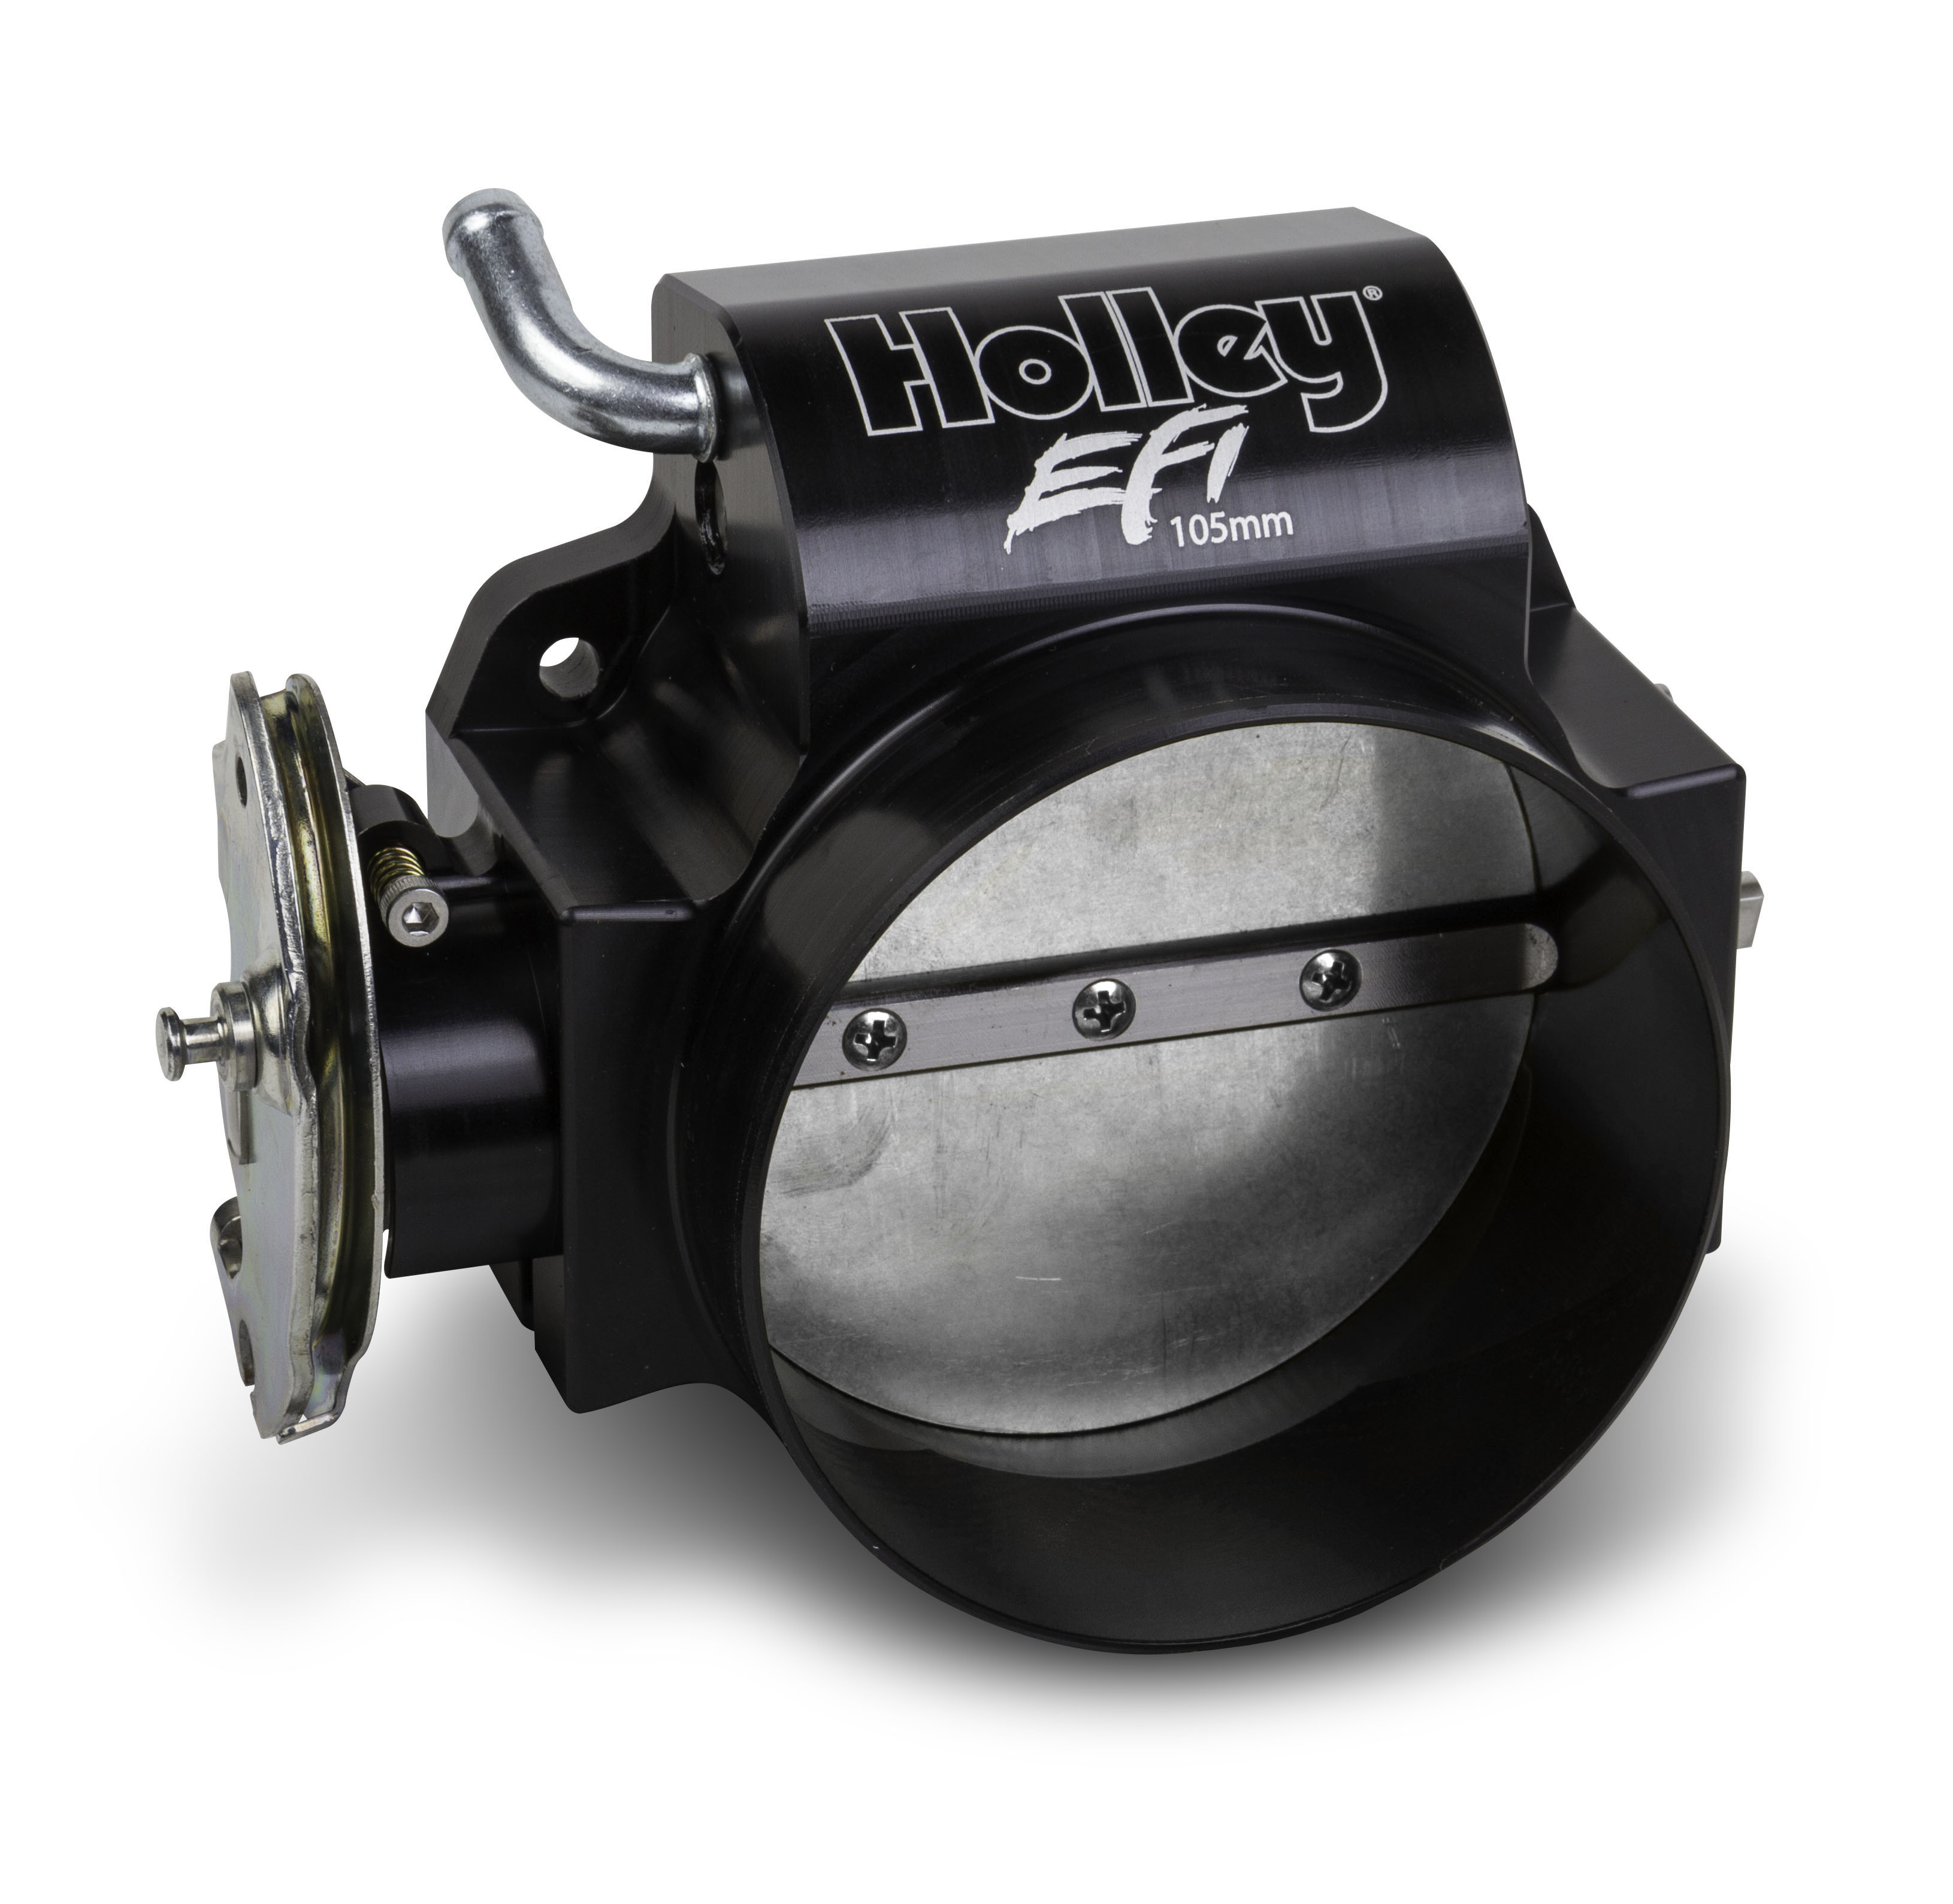 LS Holley 105mm Throttle Body w/Cable Drive and Taper